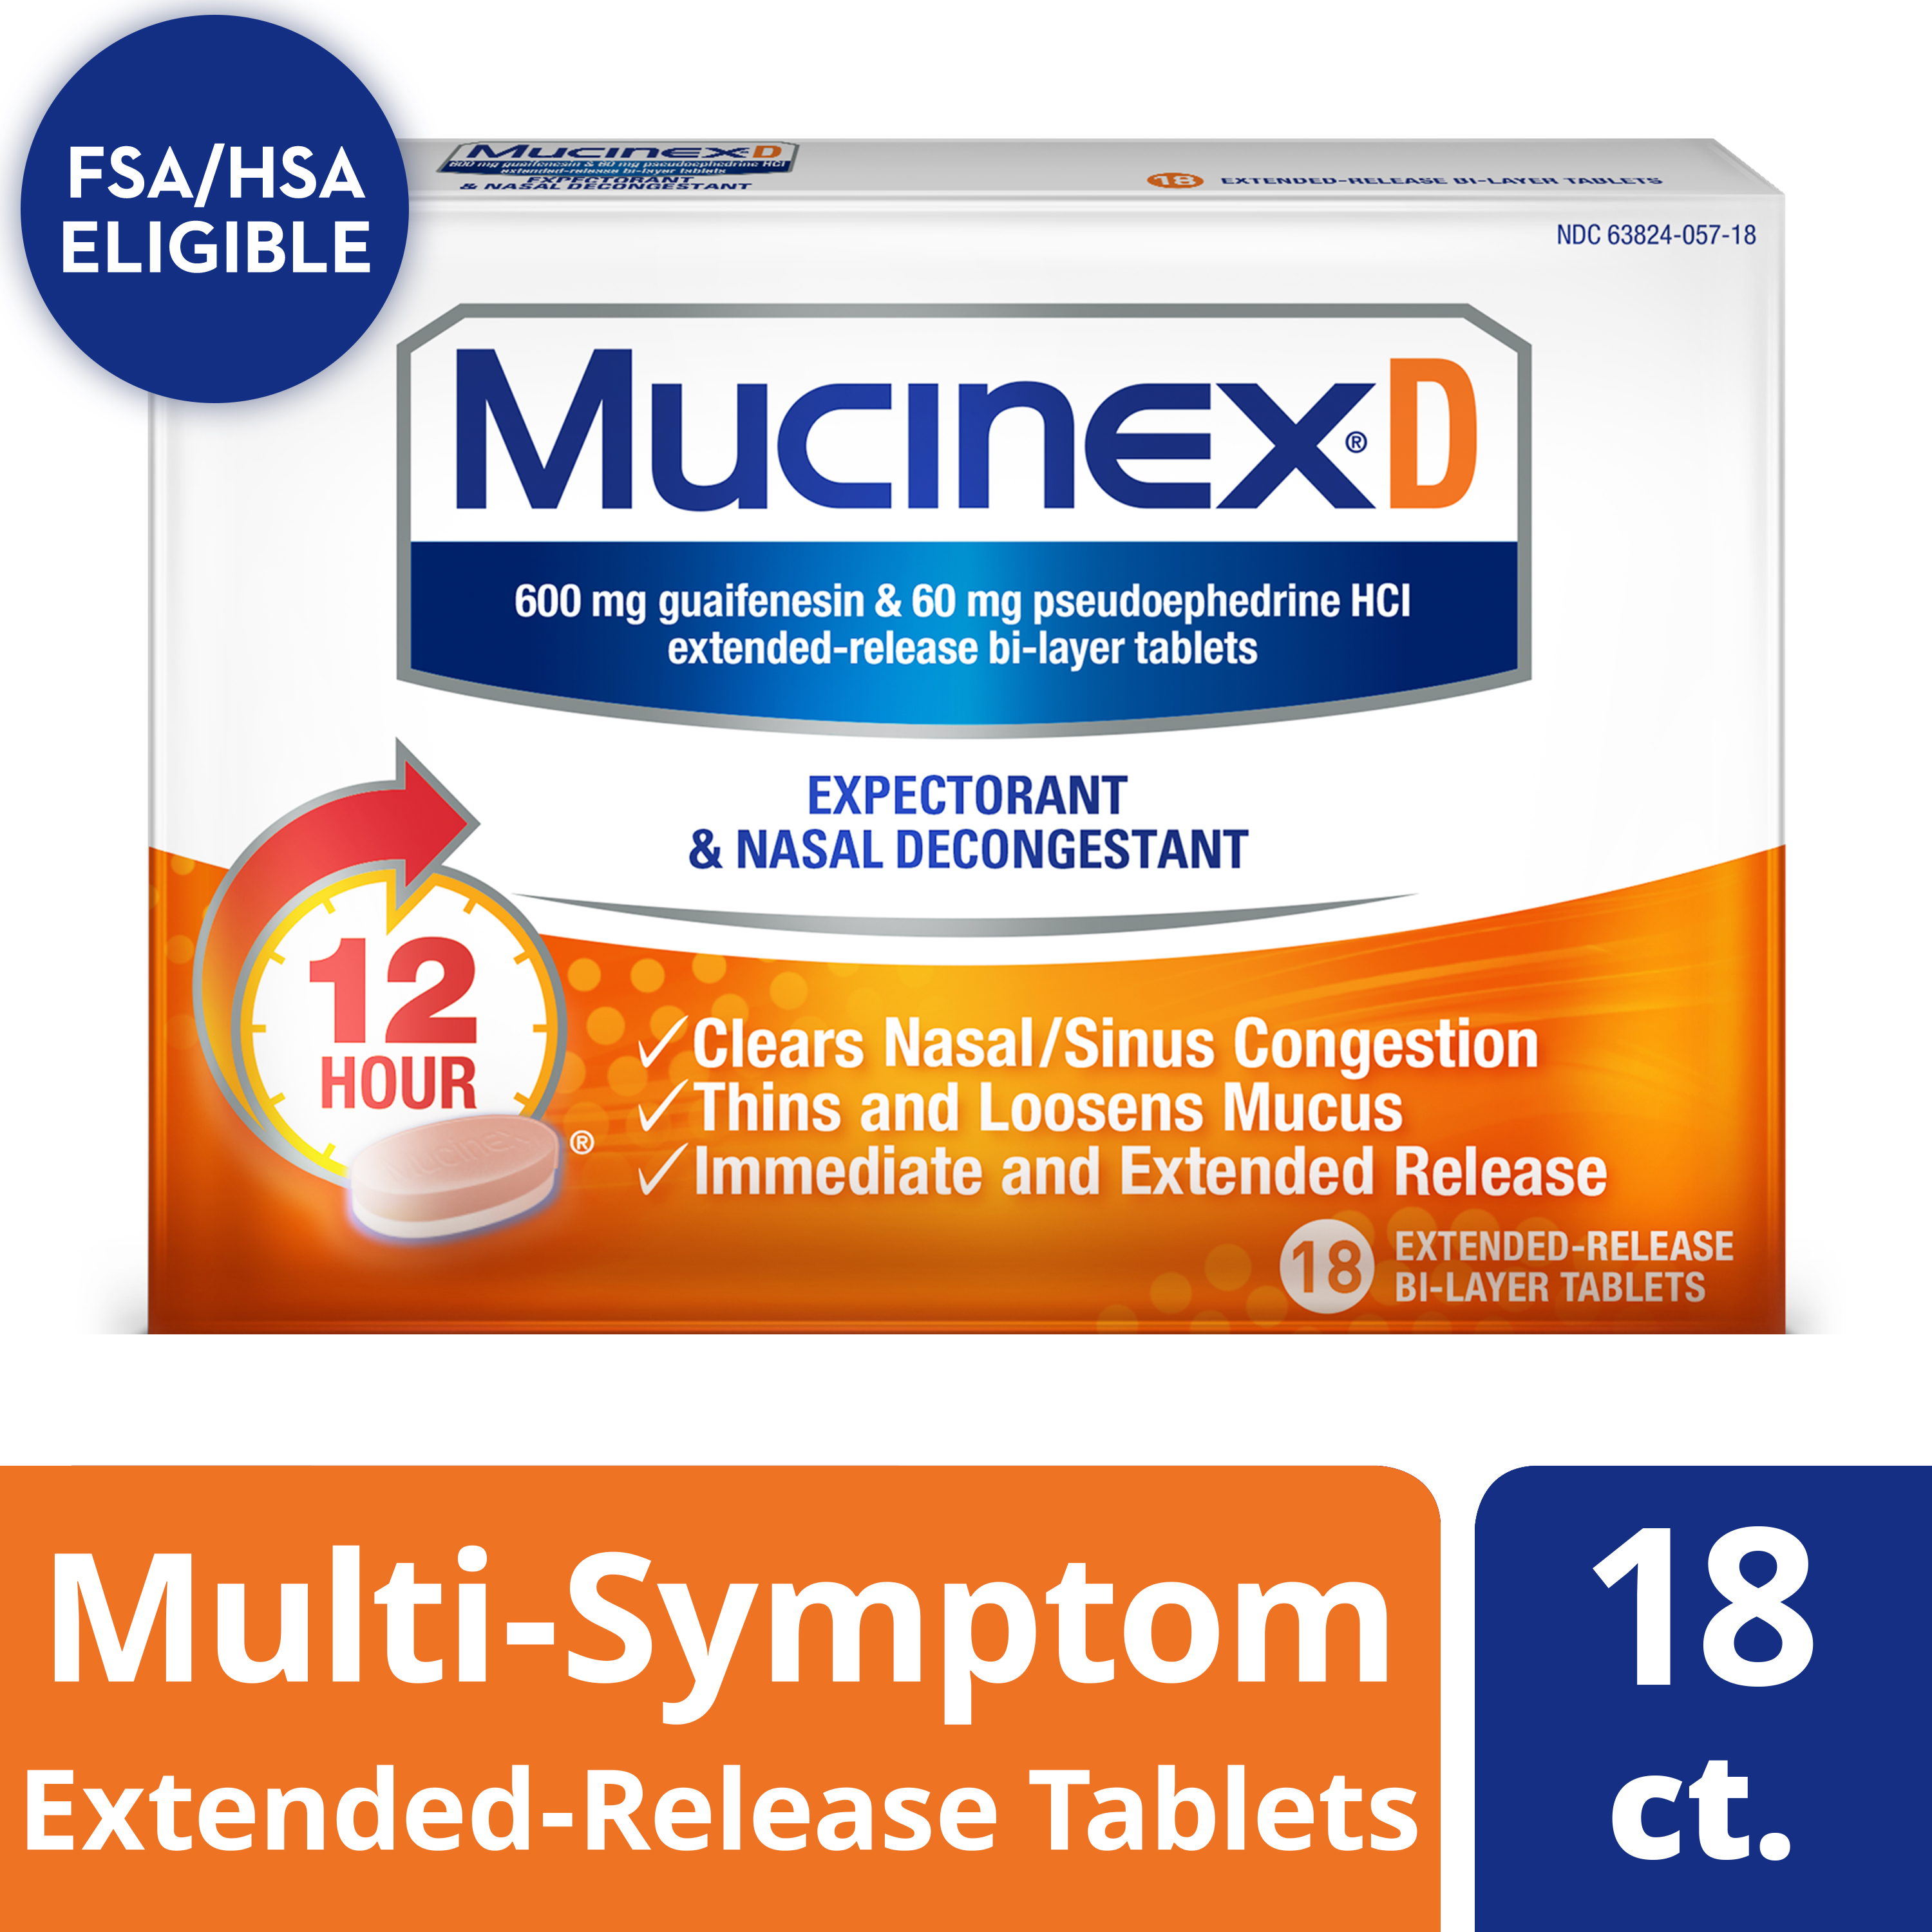 Mucinex D Expectorant and Nasal Decongestant Tablets, 18 Count - image 1 of 10